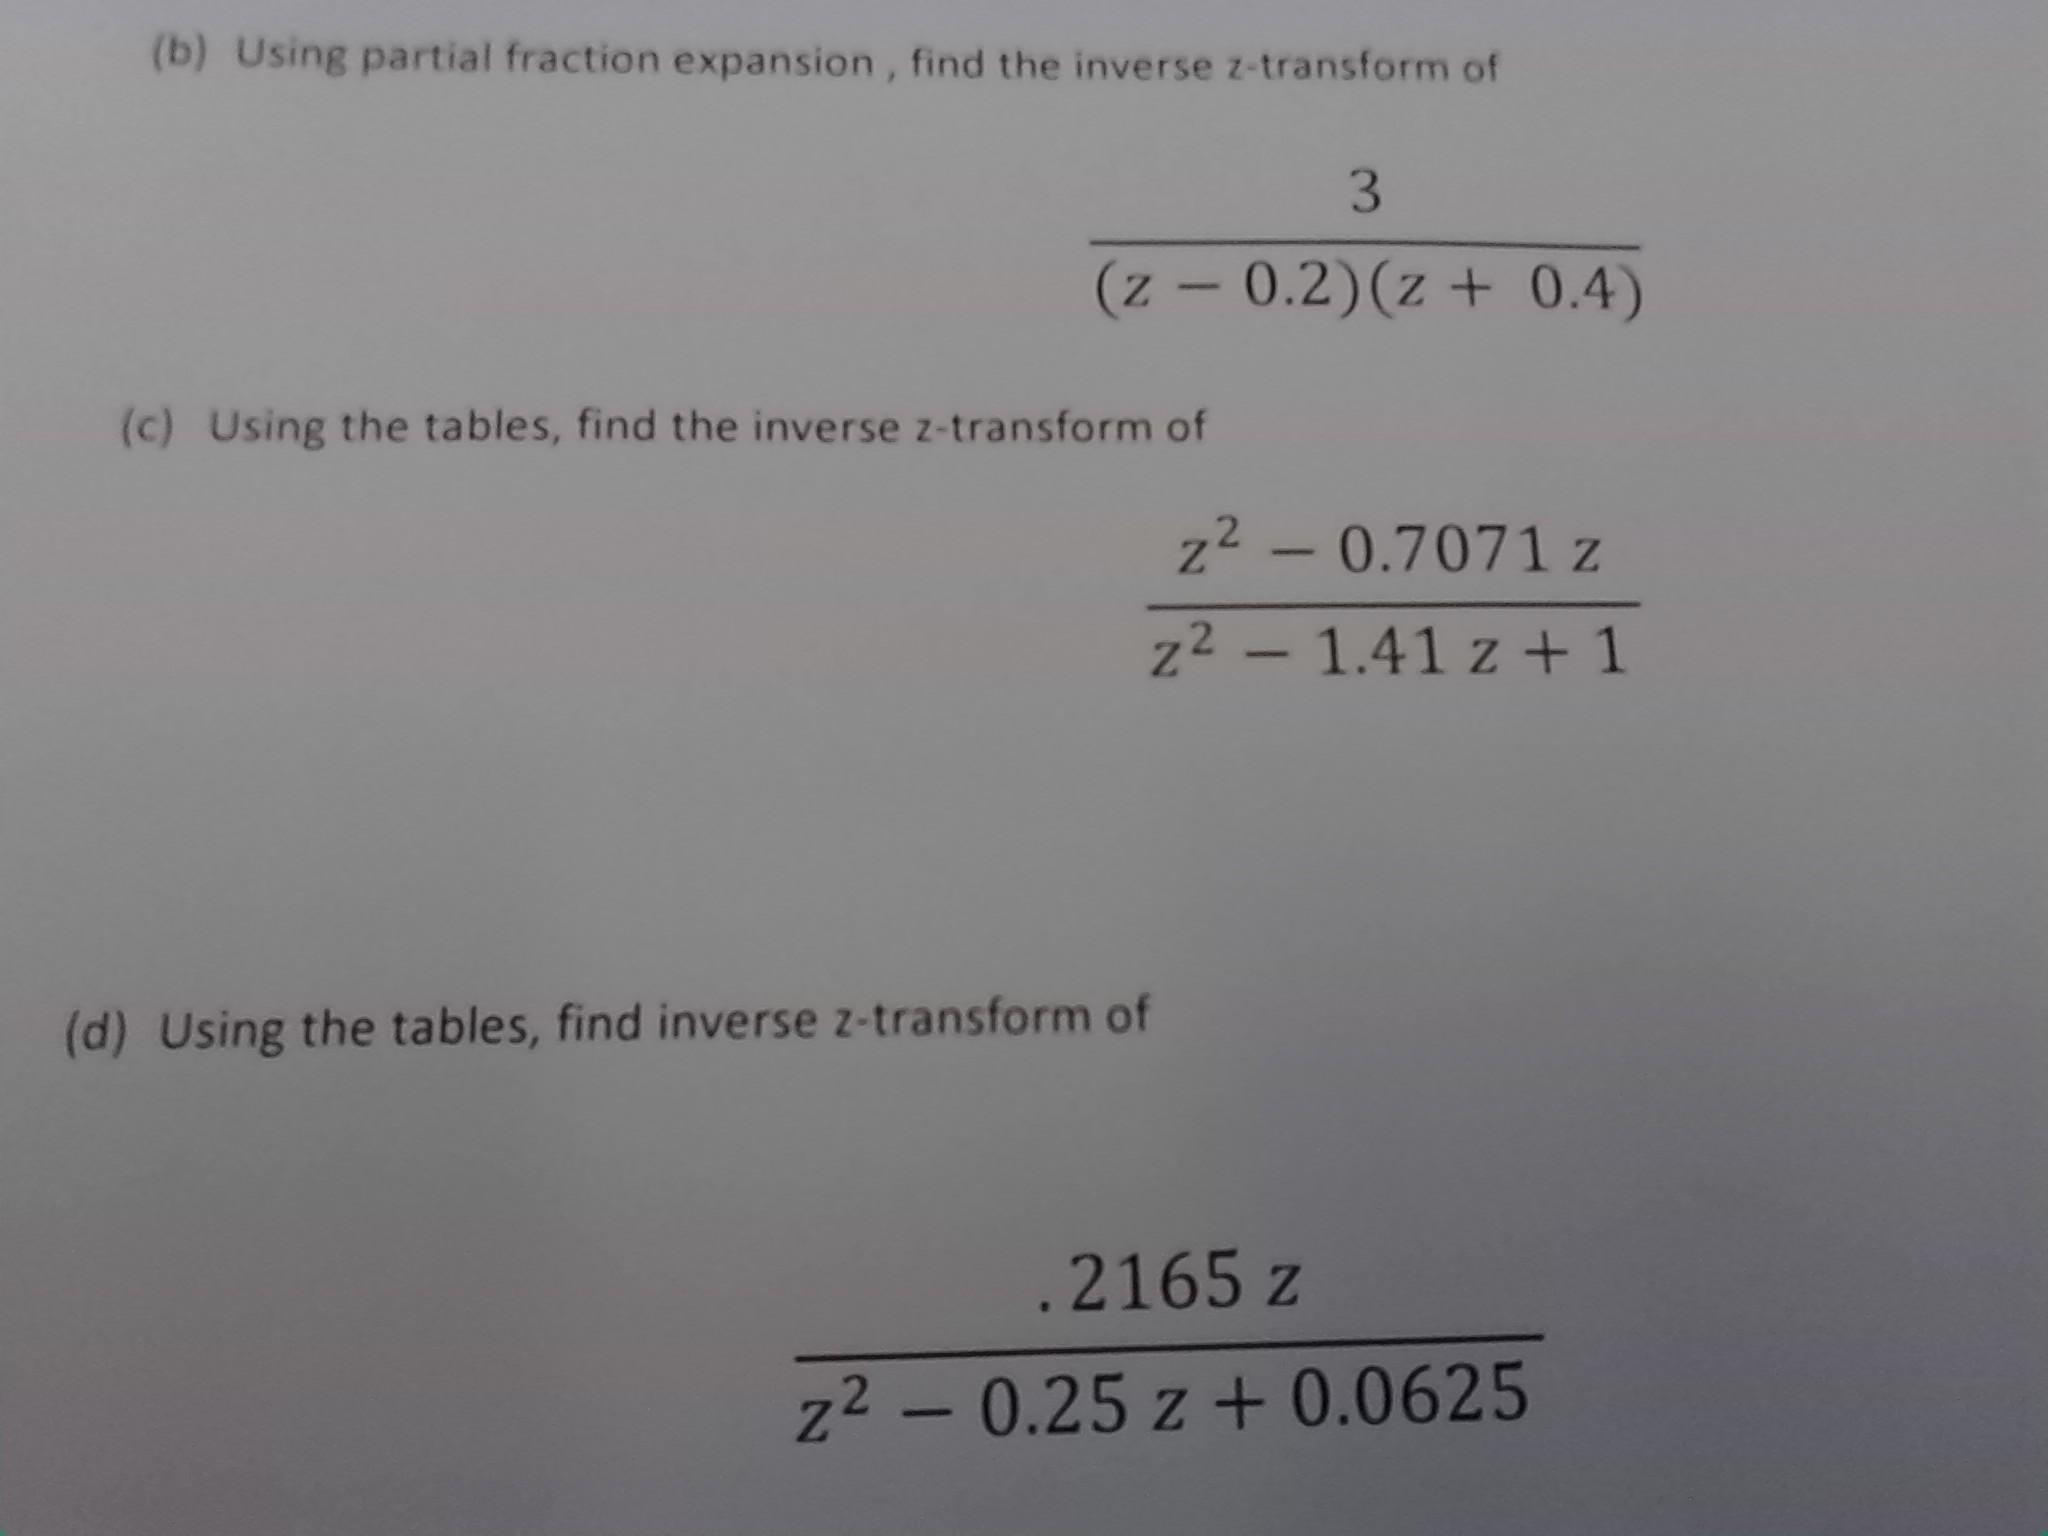 (b) Using partial fraction expansion, find the inverse z-transform of 3 (z - 0.2) (z + 0.4) (c) Using the